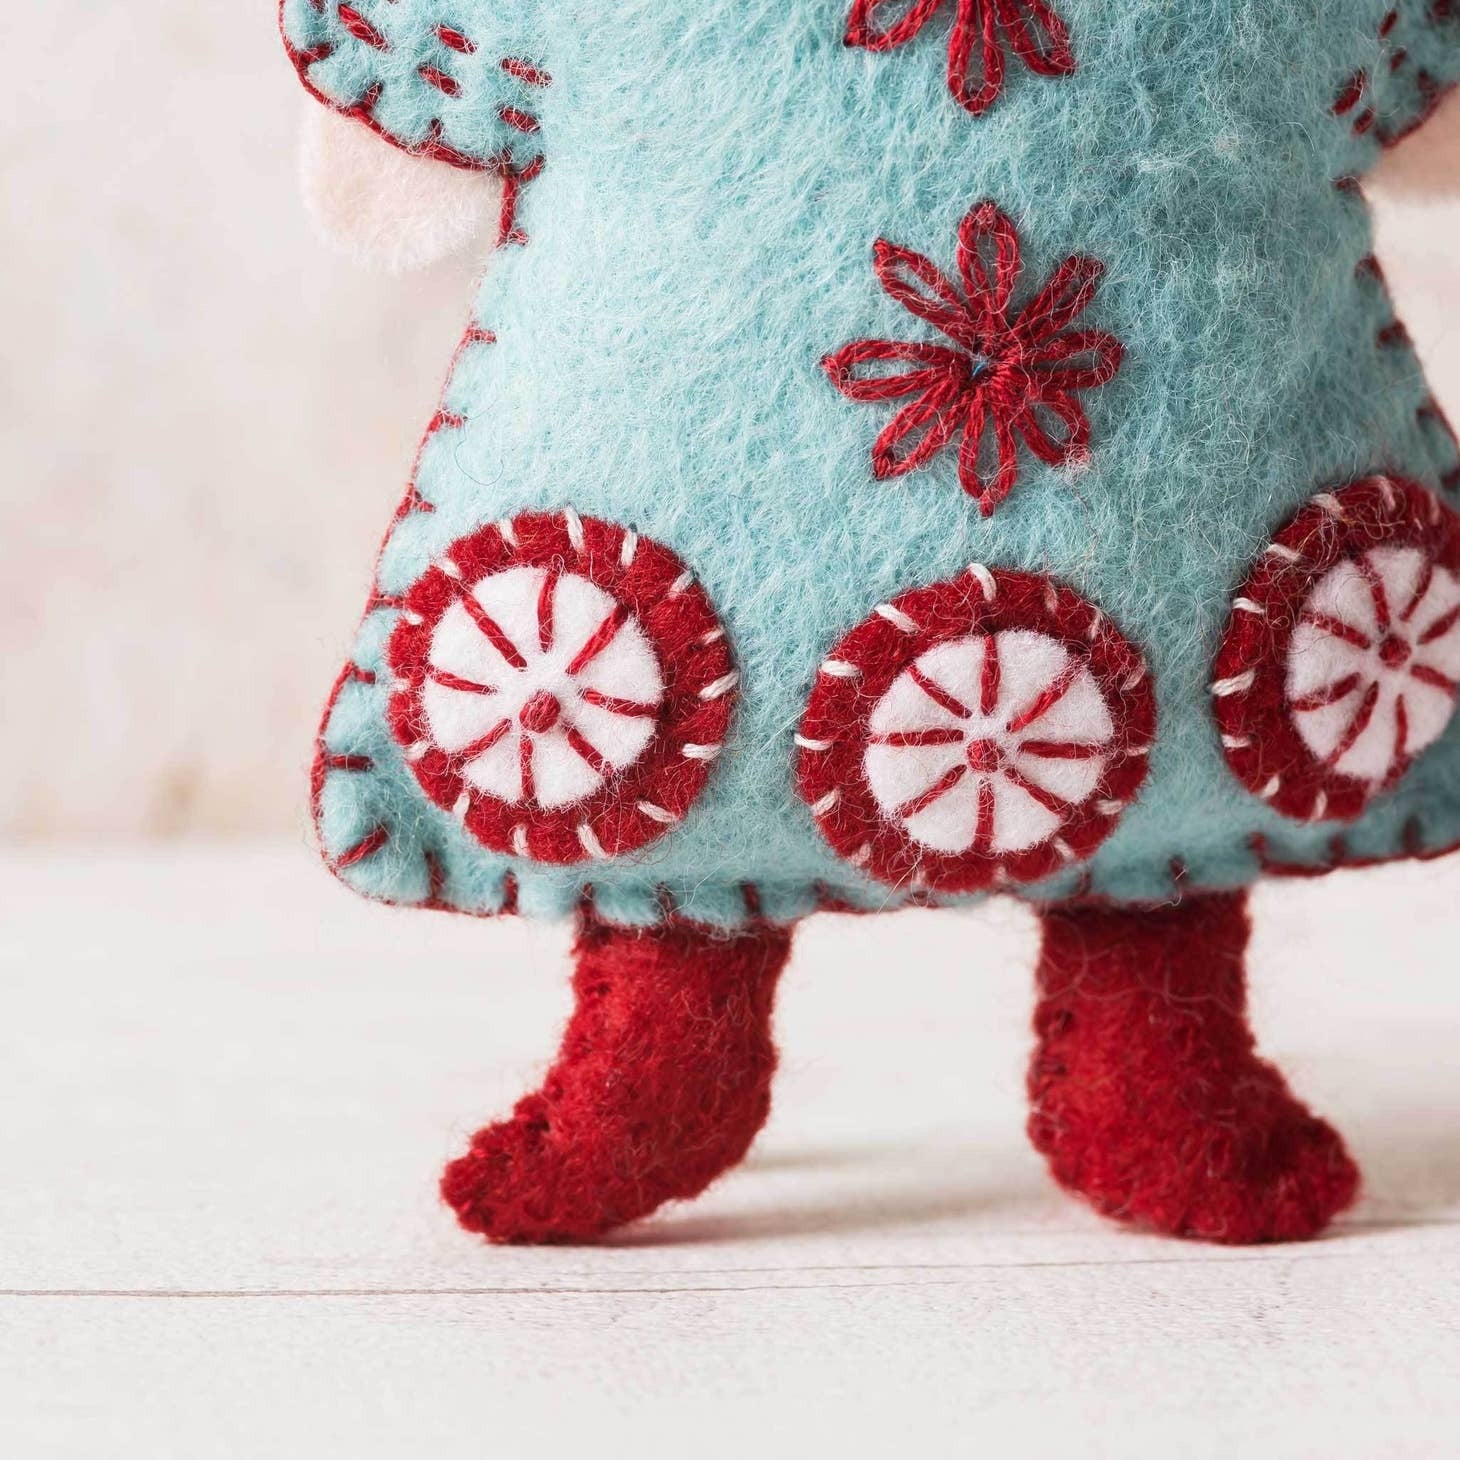 Detail shot of a handcrafted felt angel ornament highlighting the aqua-blue dress adorned with red embroidered snowflakes and plush peppermint candy designs, paired with cozy red felted boots.